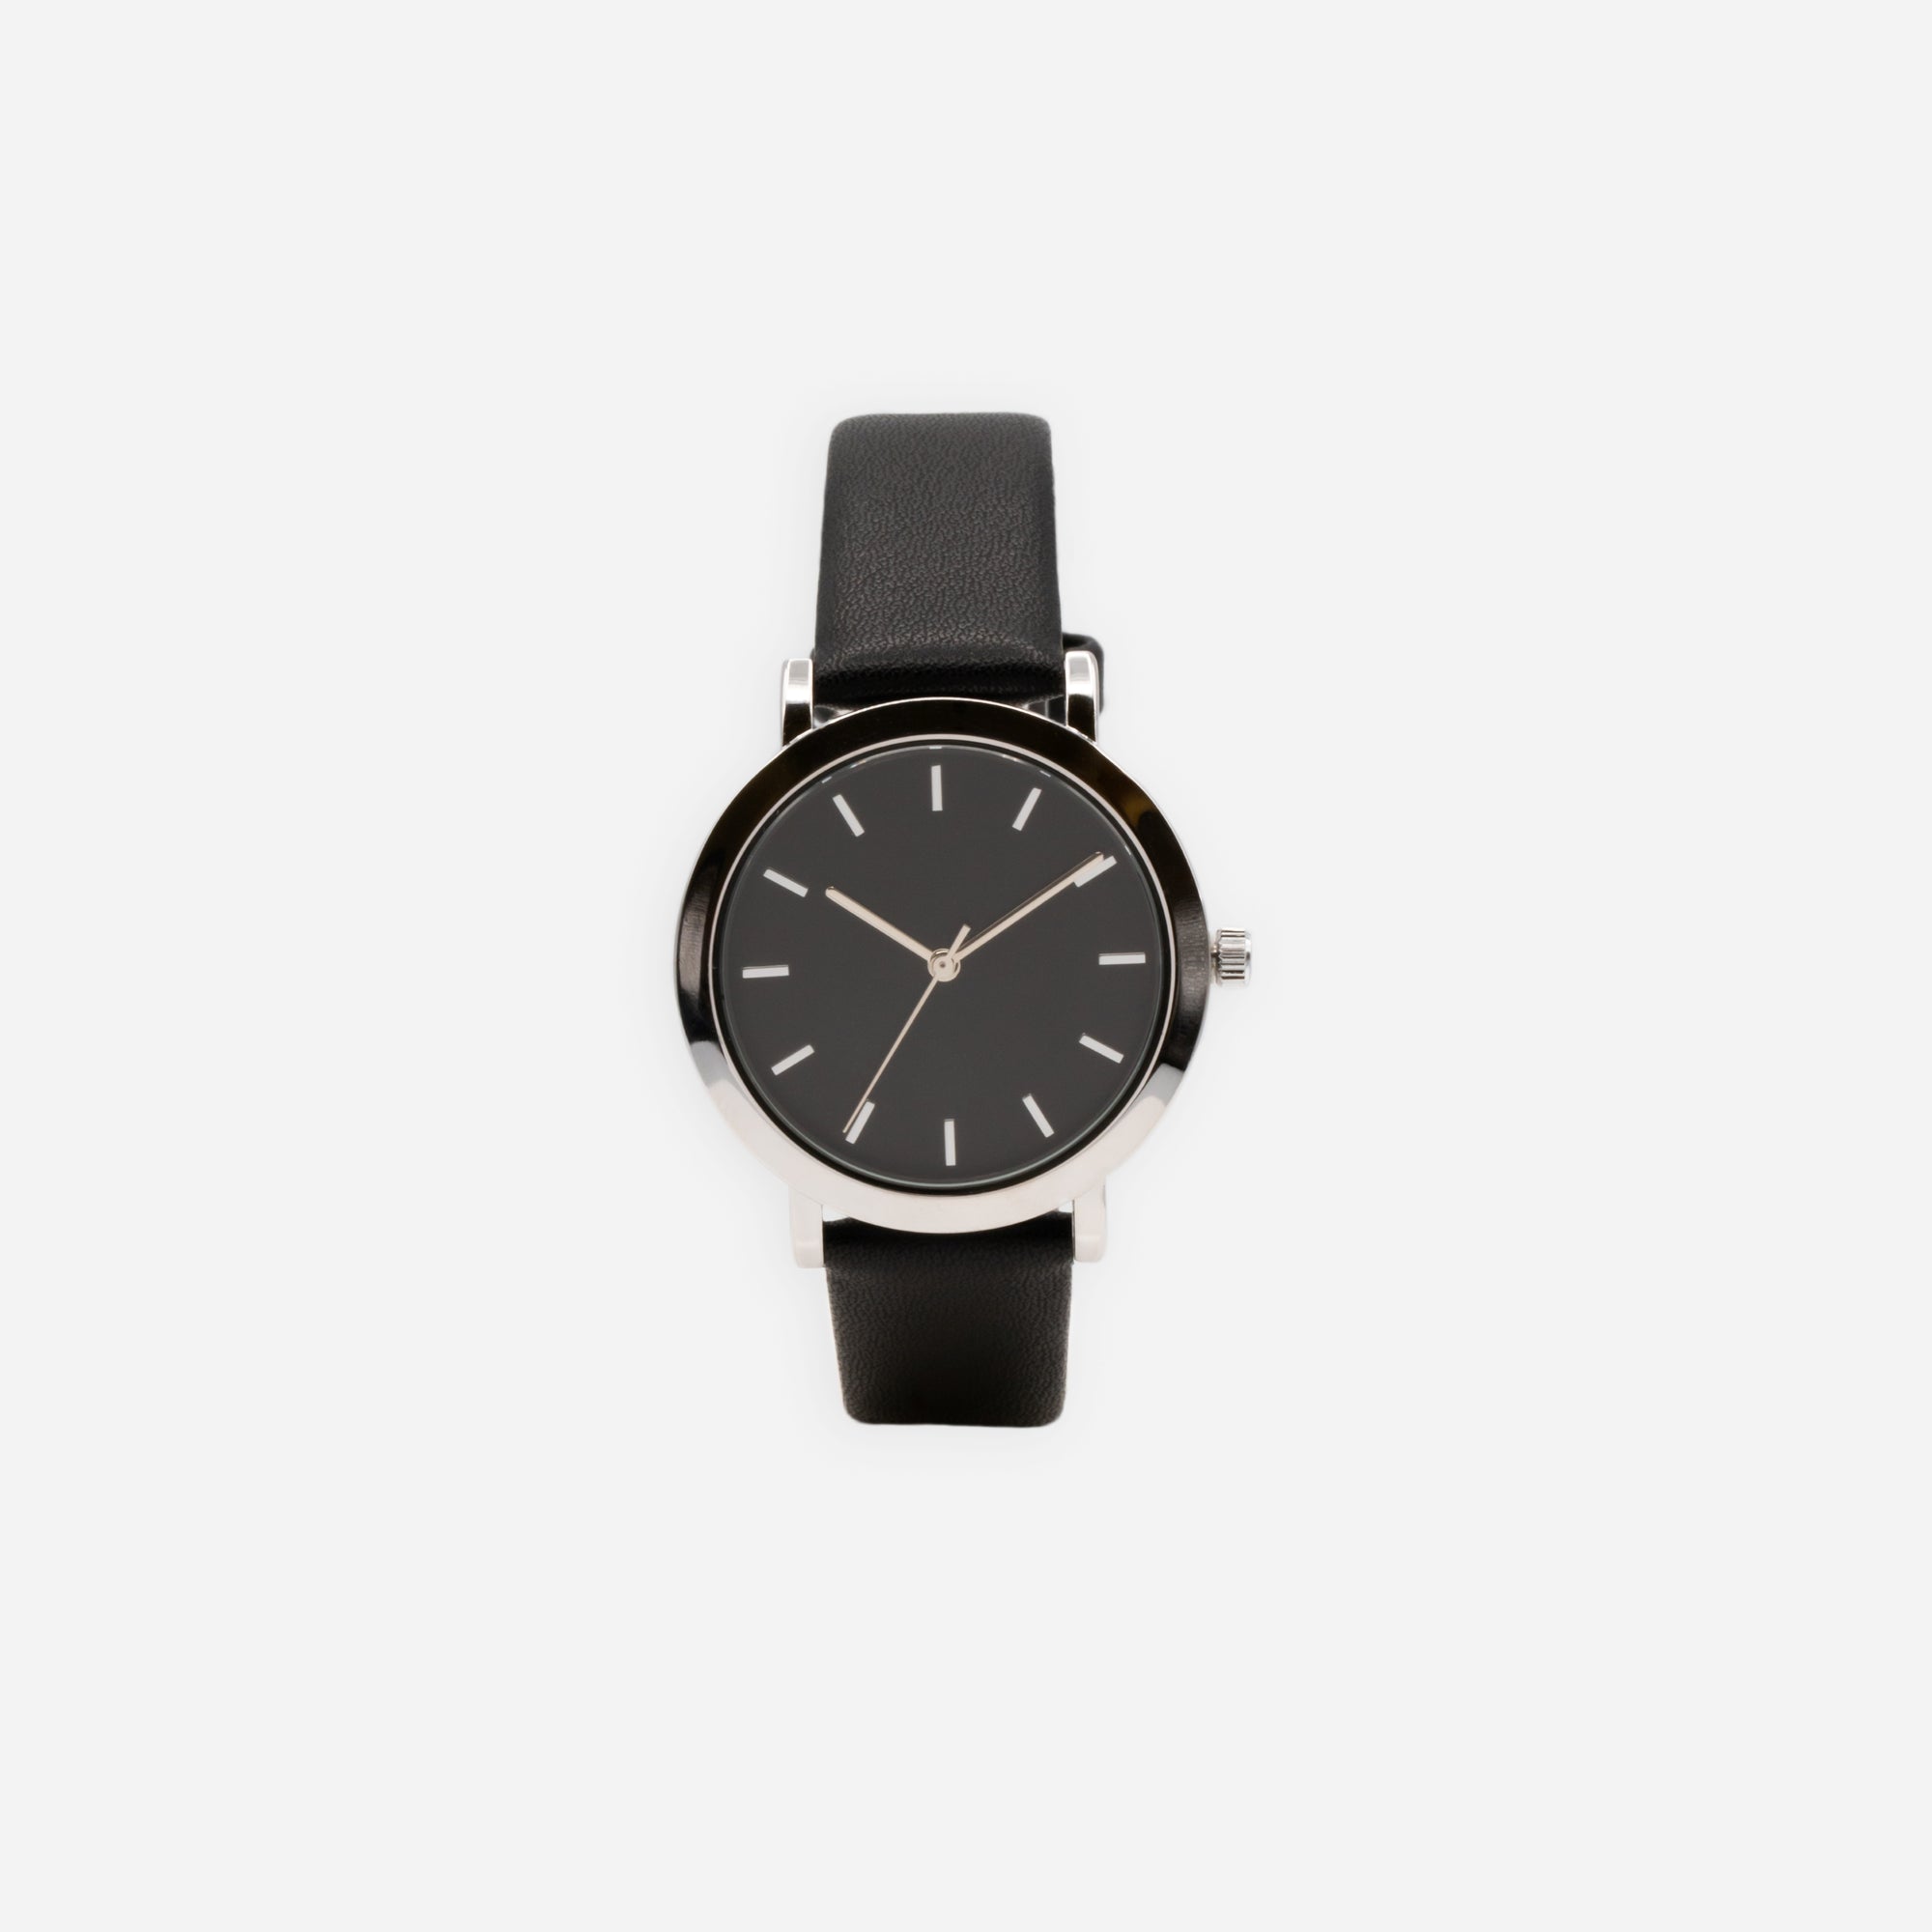 Round watch with black dial and bracelet